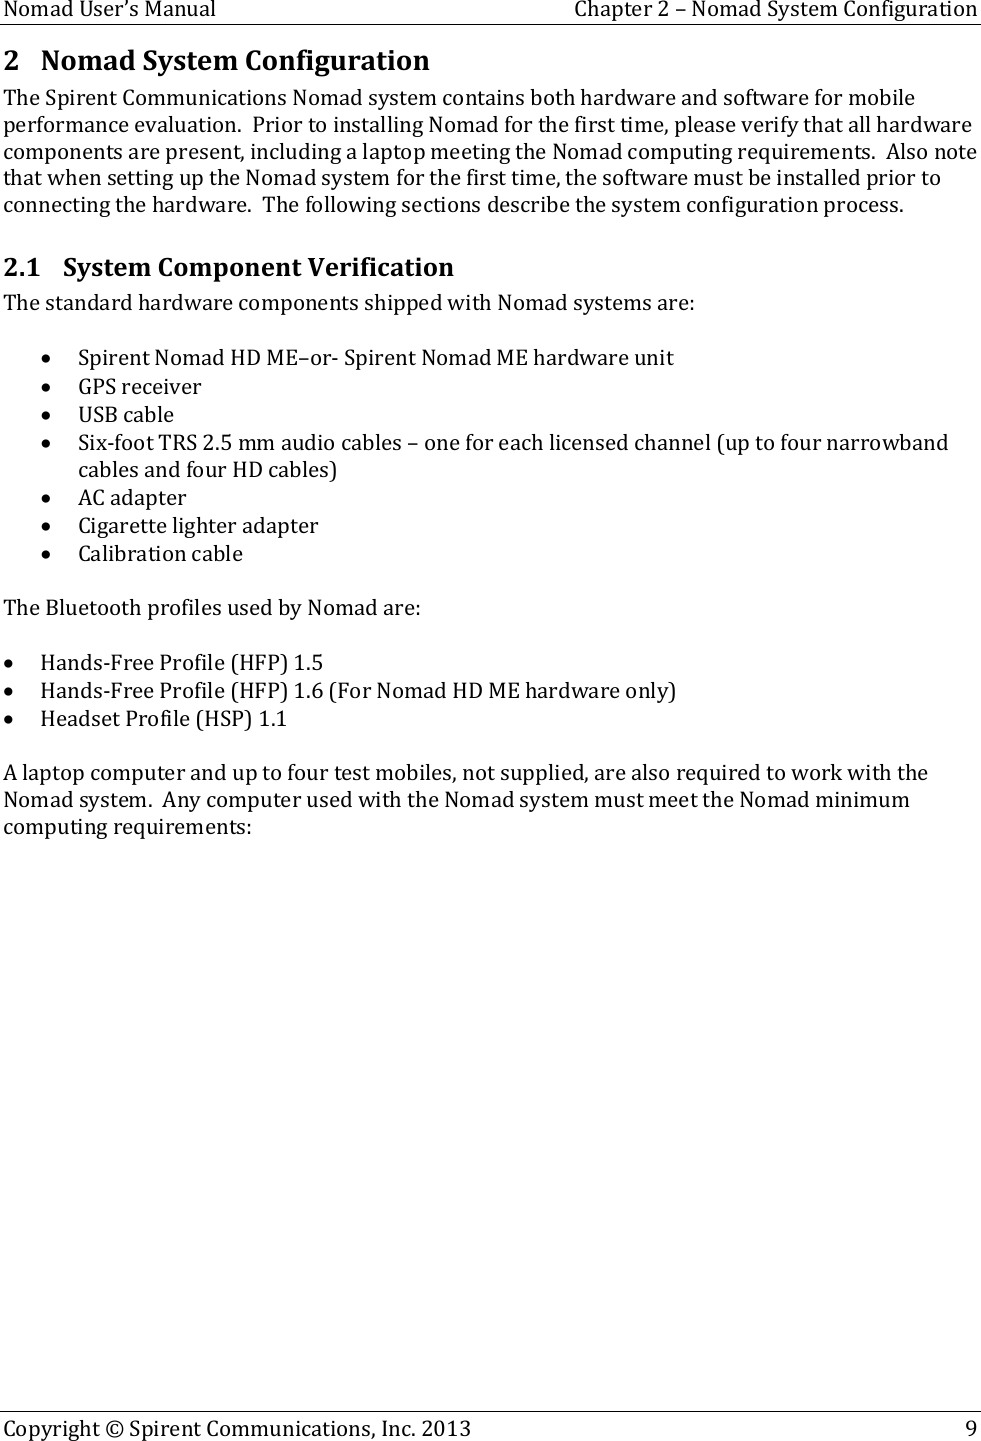  Nomad User’s Manual  Chapter 2 – Nomad System Configuration Copyright © Spirent Communications, Inc. 2013    9  2 Nomad System Configuration The Spirent Communications Nomad system contains both hardware and software for mobile performance evaluation.  Prior to installing Nomad for the first time, please verify that all hardware components are present, including a laptop meeting the Nomad computing requirements.  Also note that when setting up the Nomad system for the first time, the software must be installed prior to connecting the hardware.  The following sections describe the system configuration process. 2.1 System Component Verification The standard hardware components shipped with Nomad systems are:   Spirent Nomad HD ME–or- Spirent Nomad ME hardware unit  GPS receiver  USB cable  Six-foot TRS 2.5 mm audio cables – one for each licensed channel (up to four narrowband cables and four HD cables)  AC adapter  Cigarette lighter adapter  Calibration cable  The Bluetooth profiles used by Nomad are:   Hands-Free Profile (HFP) 1.5  Hands-Free Profile (HFP) 1.6 (For Nomad HD ME hardware only)  Headset Profile (HSP) 1.1  A laptop computer and up to four test mobiles, not supplied, are also required to work with the Nomad system.  Any computer used with the Nomad system must meet the Nomad minimum computing requirements:    